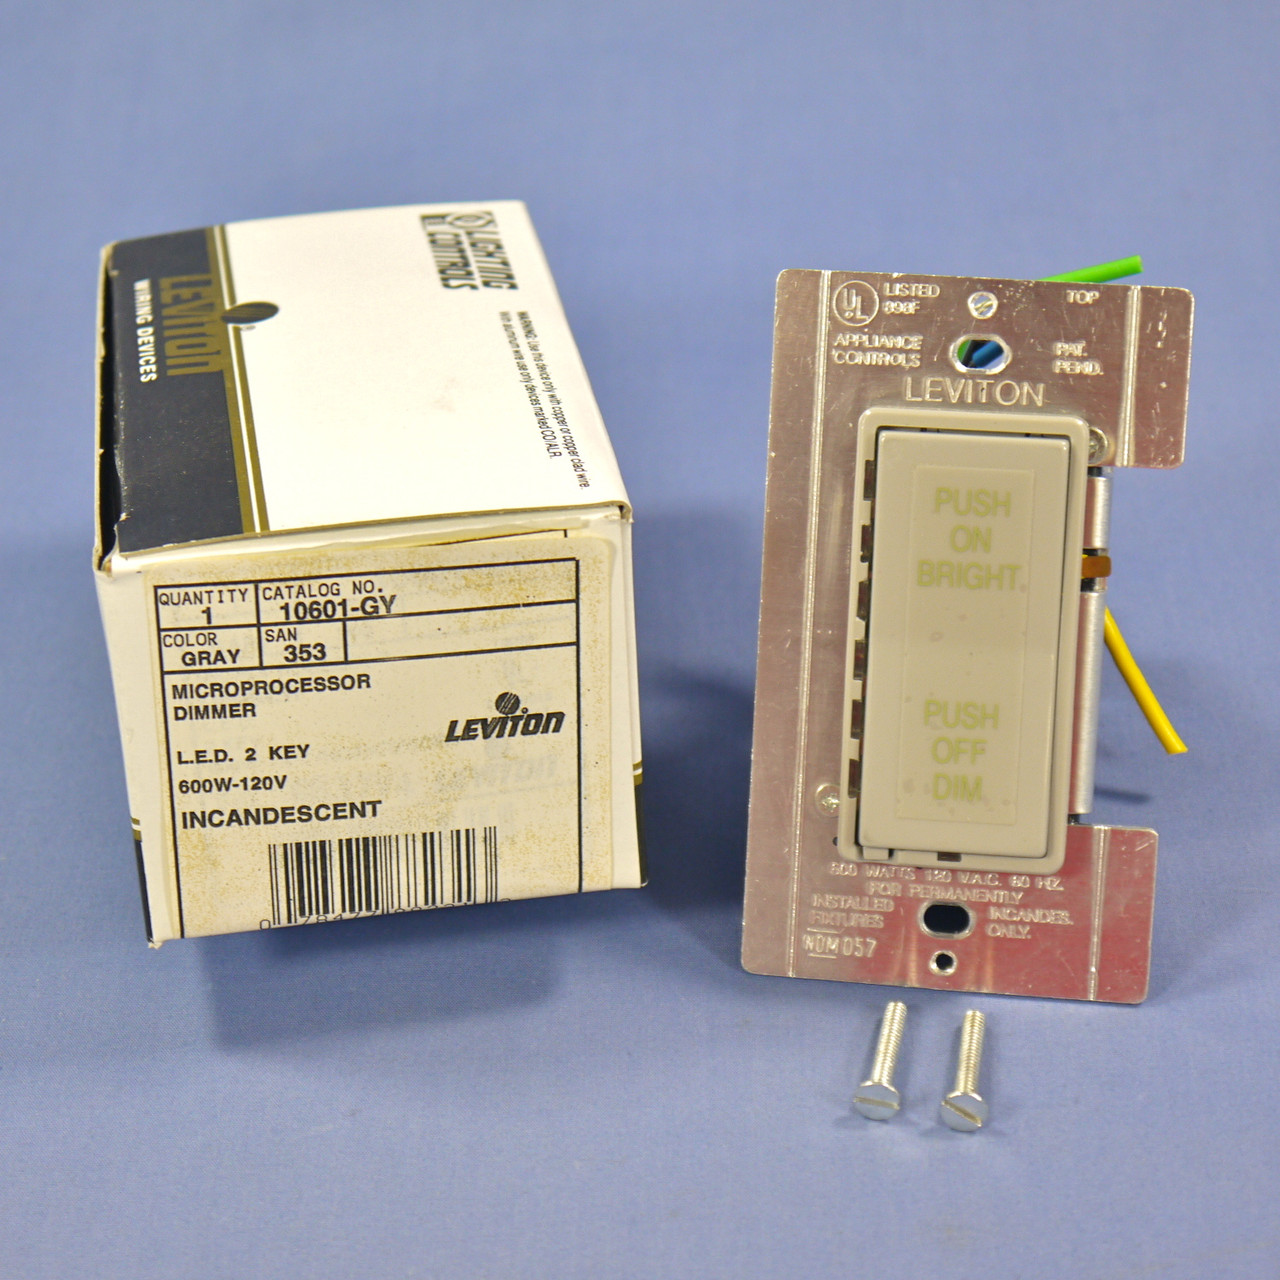 🏠 Leviton Gray Multi-Way Dimmer Switch MicroDim Display 2-Key 600W Incandescent 10601-GY - In Stock - Fruit Ridge Tools